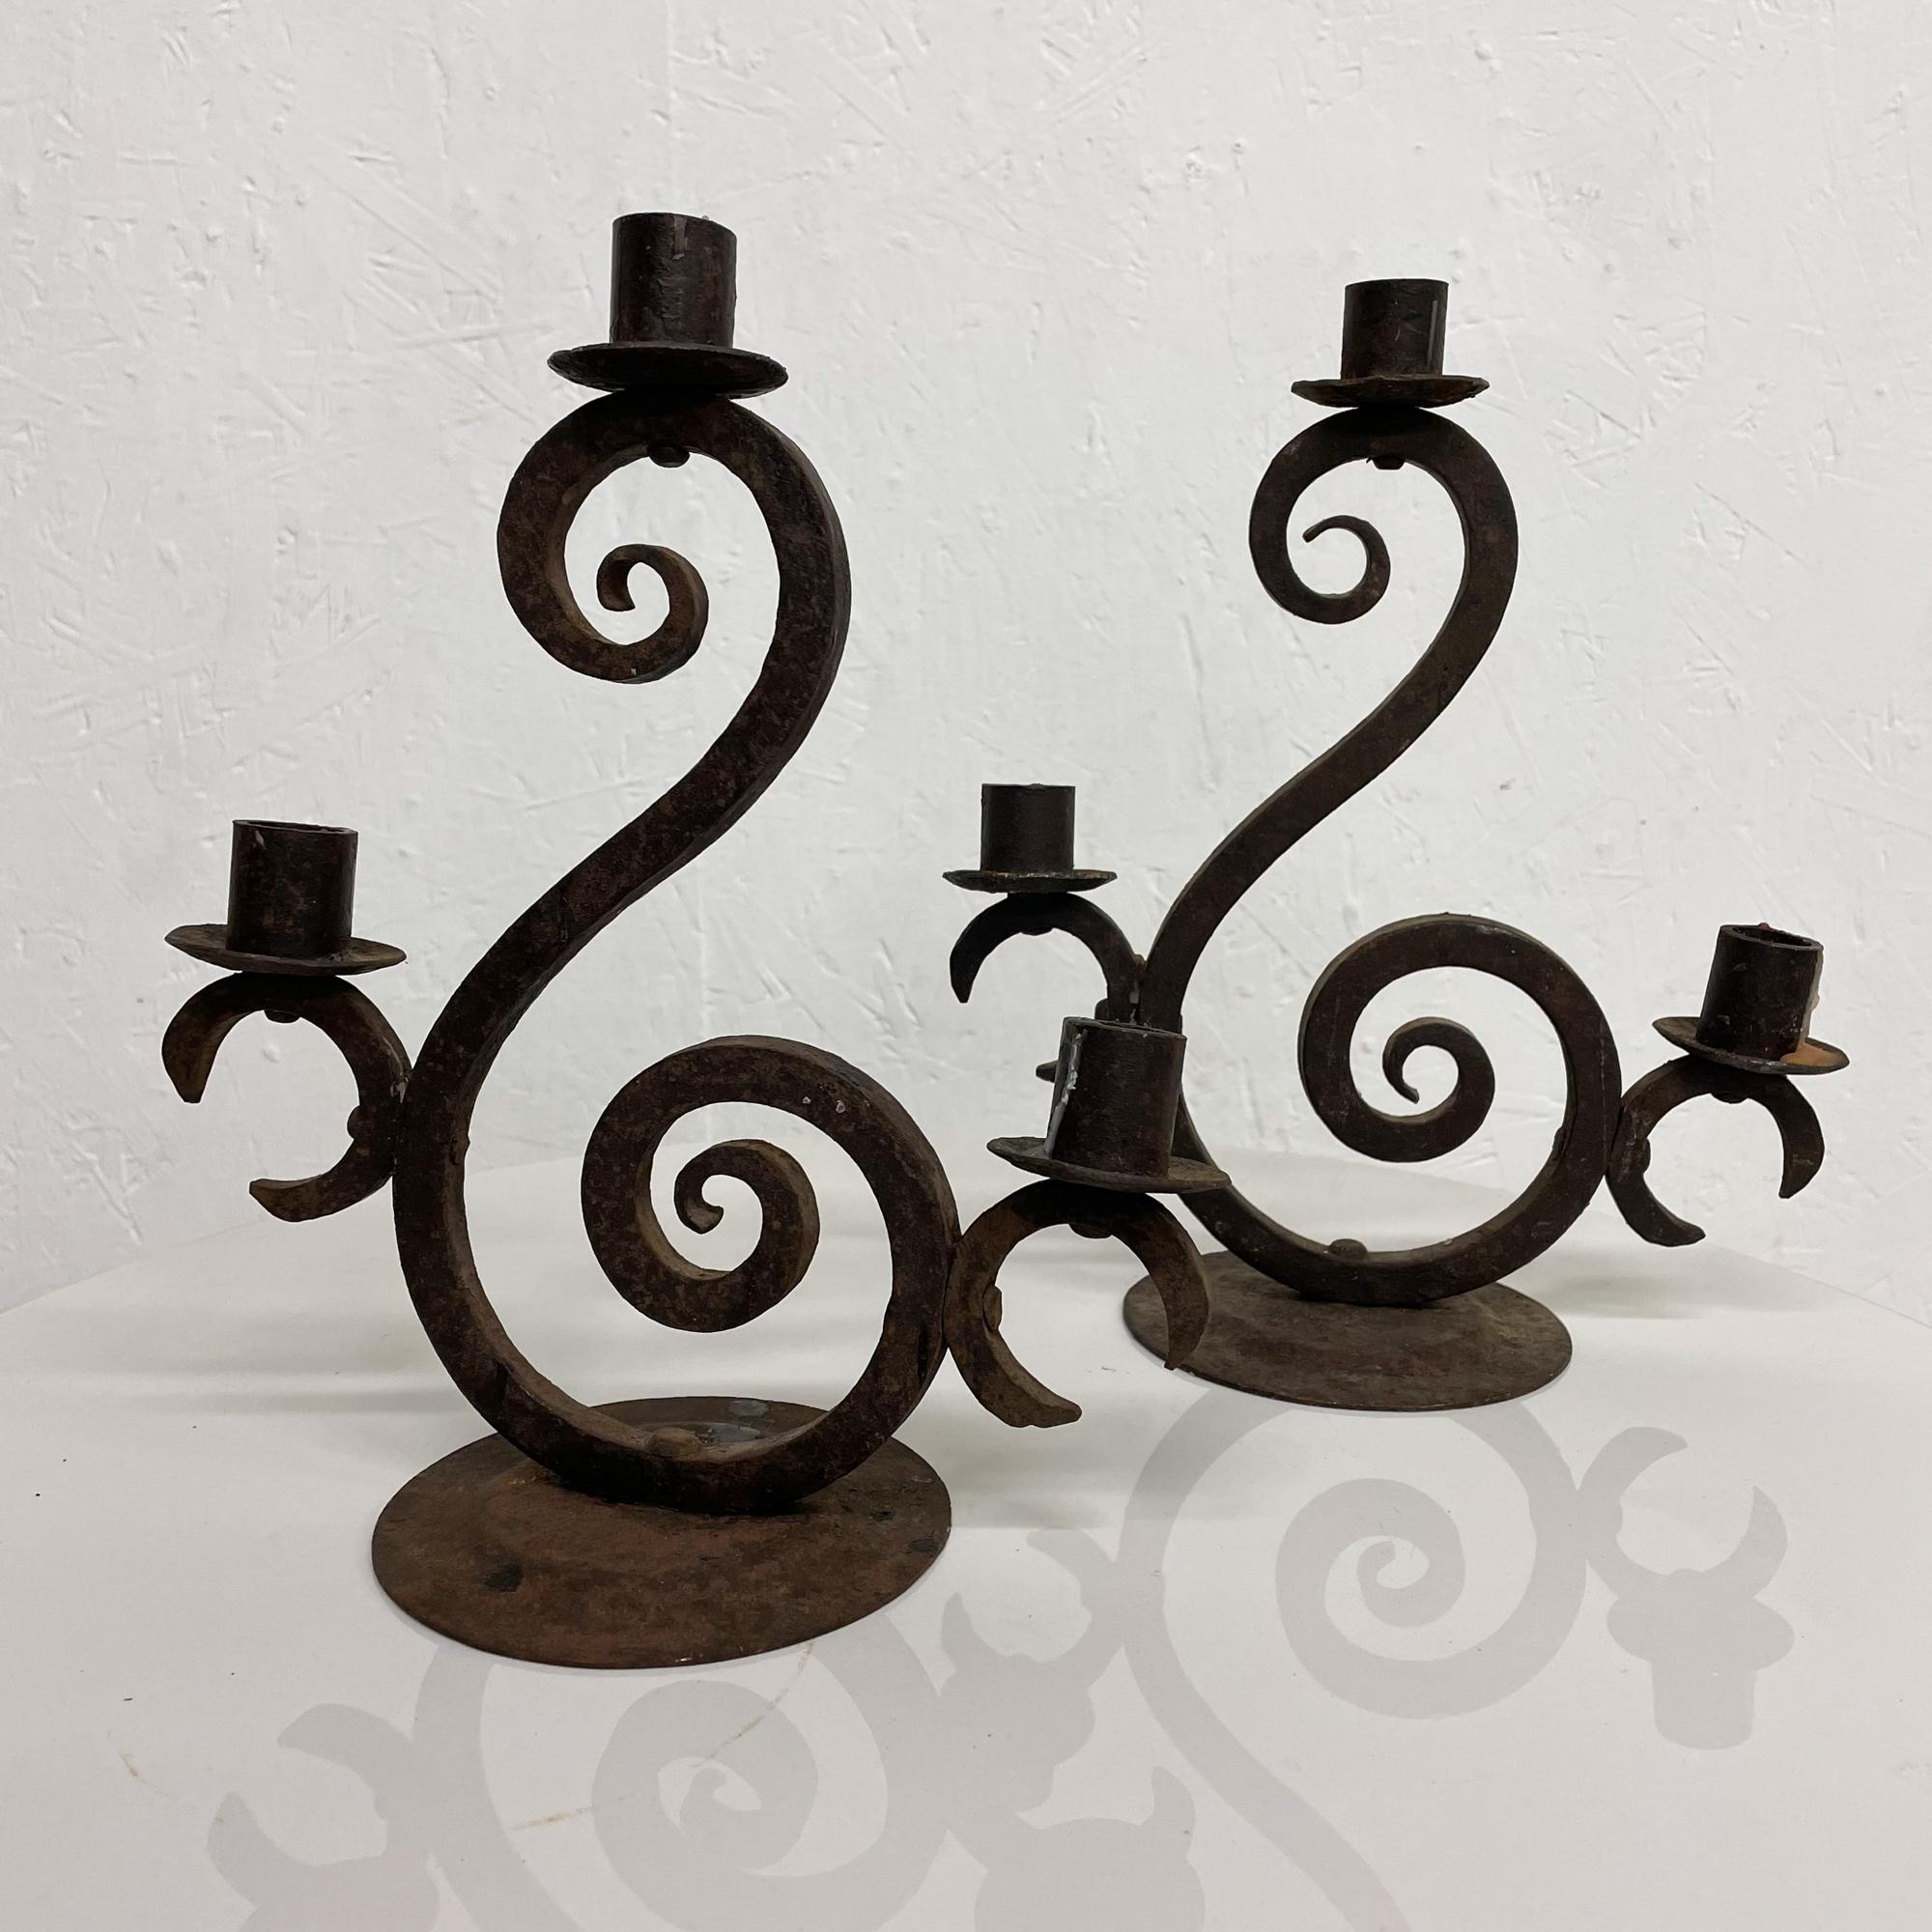 Vintage rustic forged pretty scroll Spanish iron three arm candle holders each candelabra
Set of two candelabras circa 1940s Spanish Colonial
Measures: 11.88 height x 10 width x 5 in diameter
Original unrestored vintage condition.
See images.

